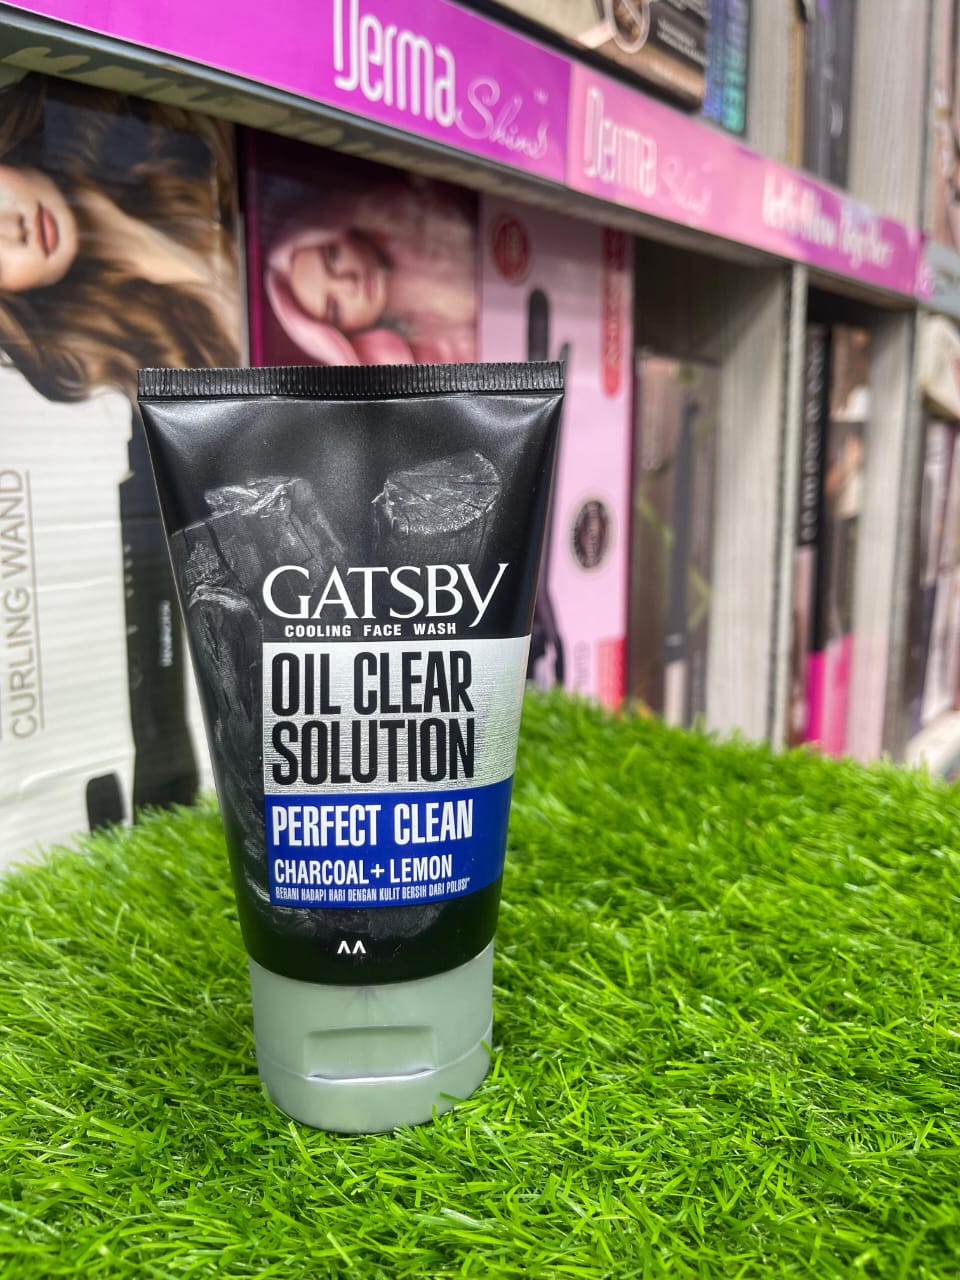 Gatsby Oil Clear Solution Face wash for men